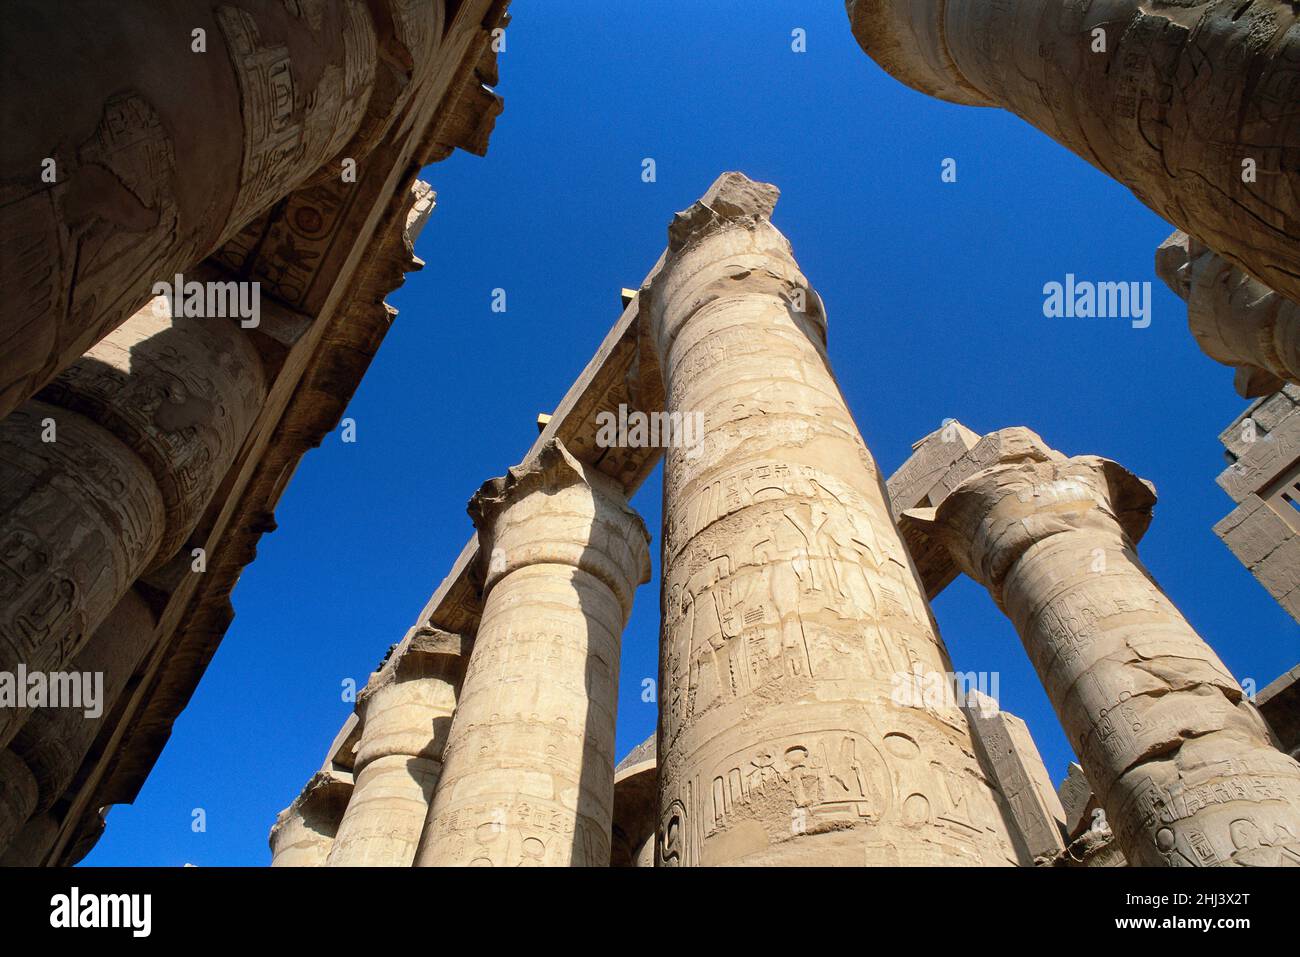 Columns inside the Great Hypostyle Hall of the Great Temple of Amun, The Temples of Karnak, Luxor, Egypt Stock Photo